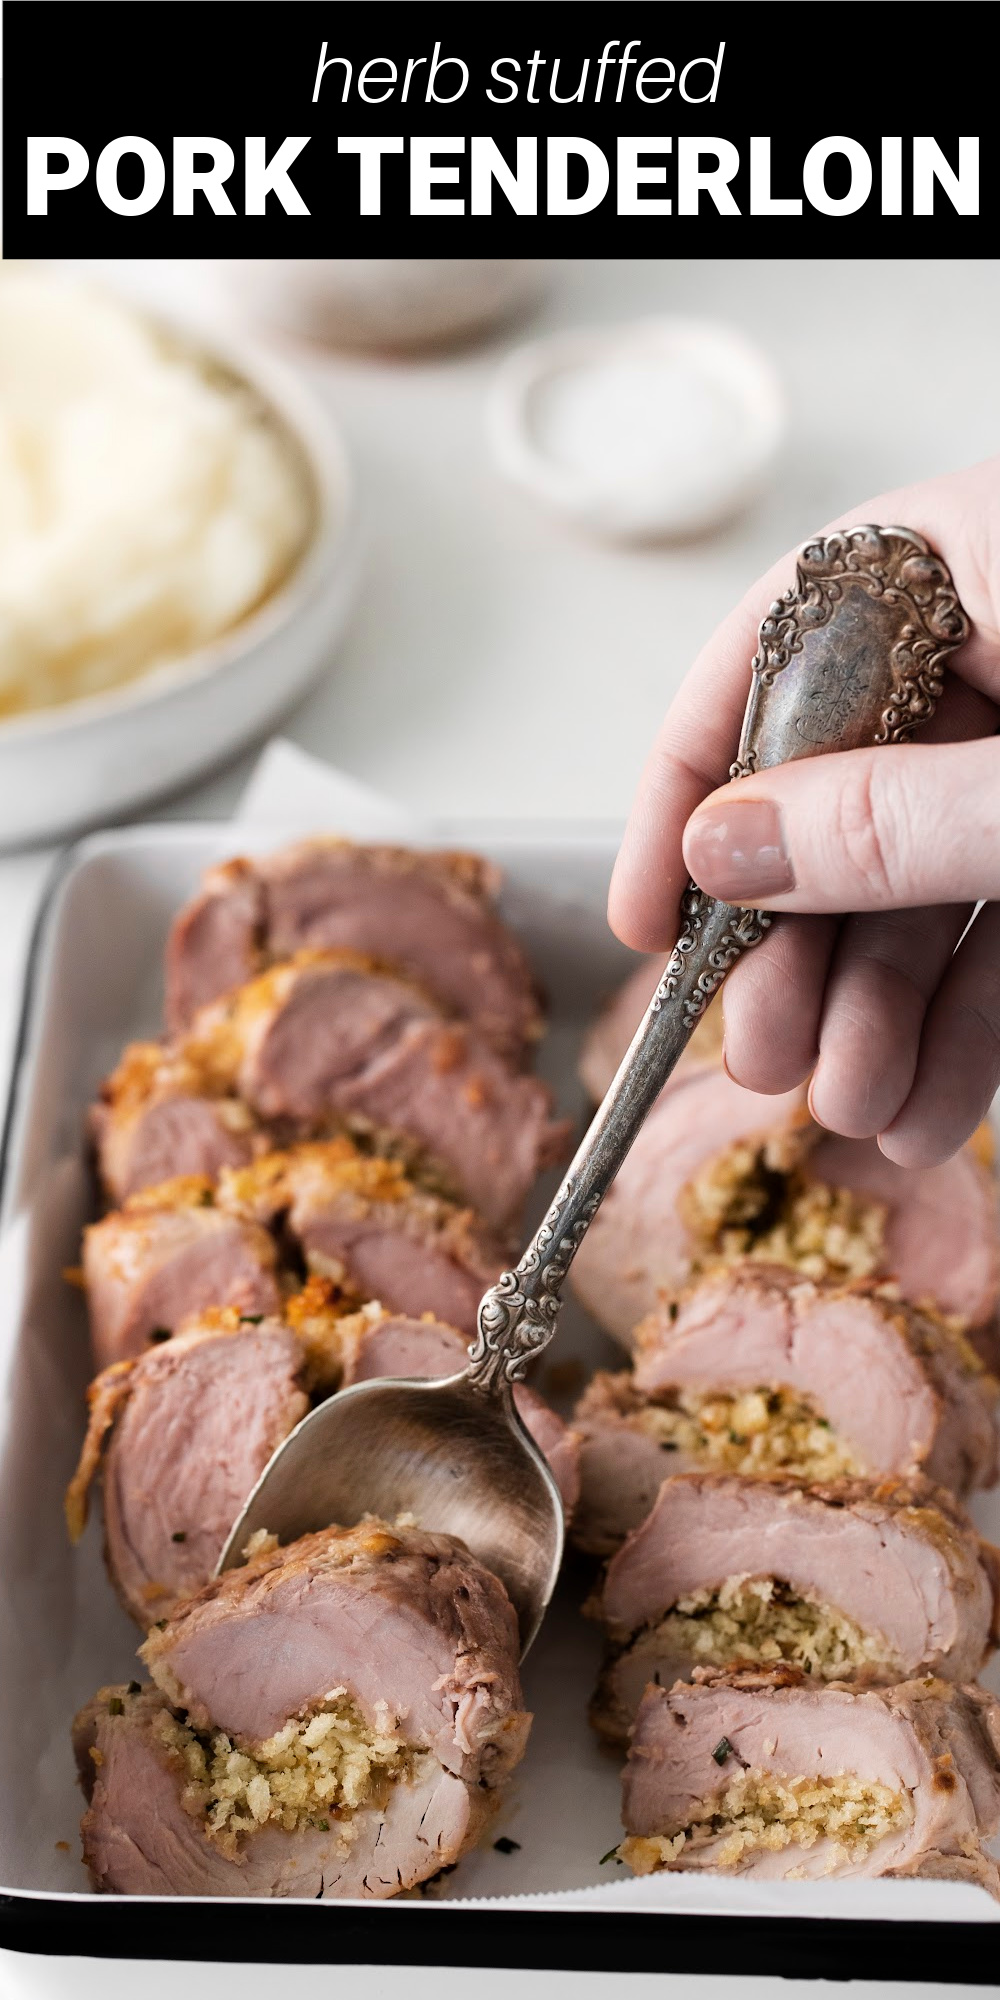 This Herb Stuffed Pork Tenderloin recipe is ideal for when you're entertaining guests but it’s also great for a family style Sunday dinner. Pork tenderloins are stuffed with an incredibly fragrant stuffing, roasted until tender then basted with super flavorful, buttery pan sauce.